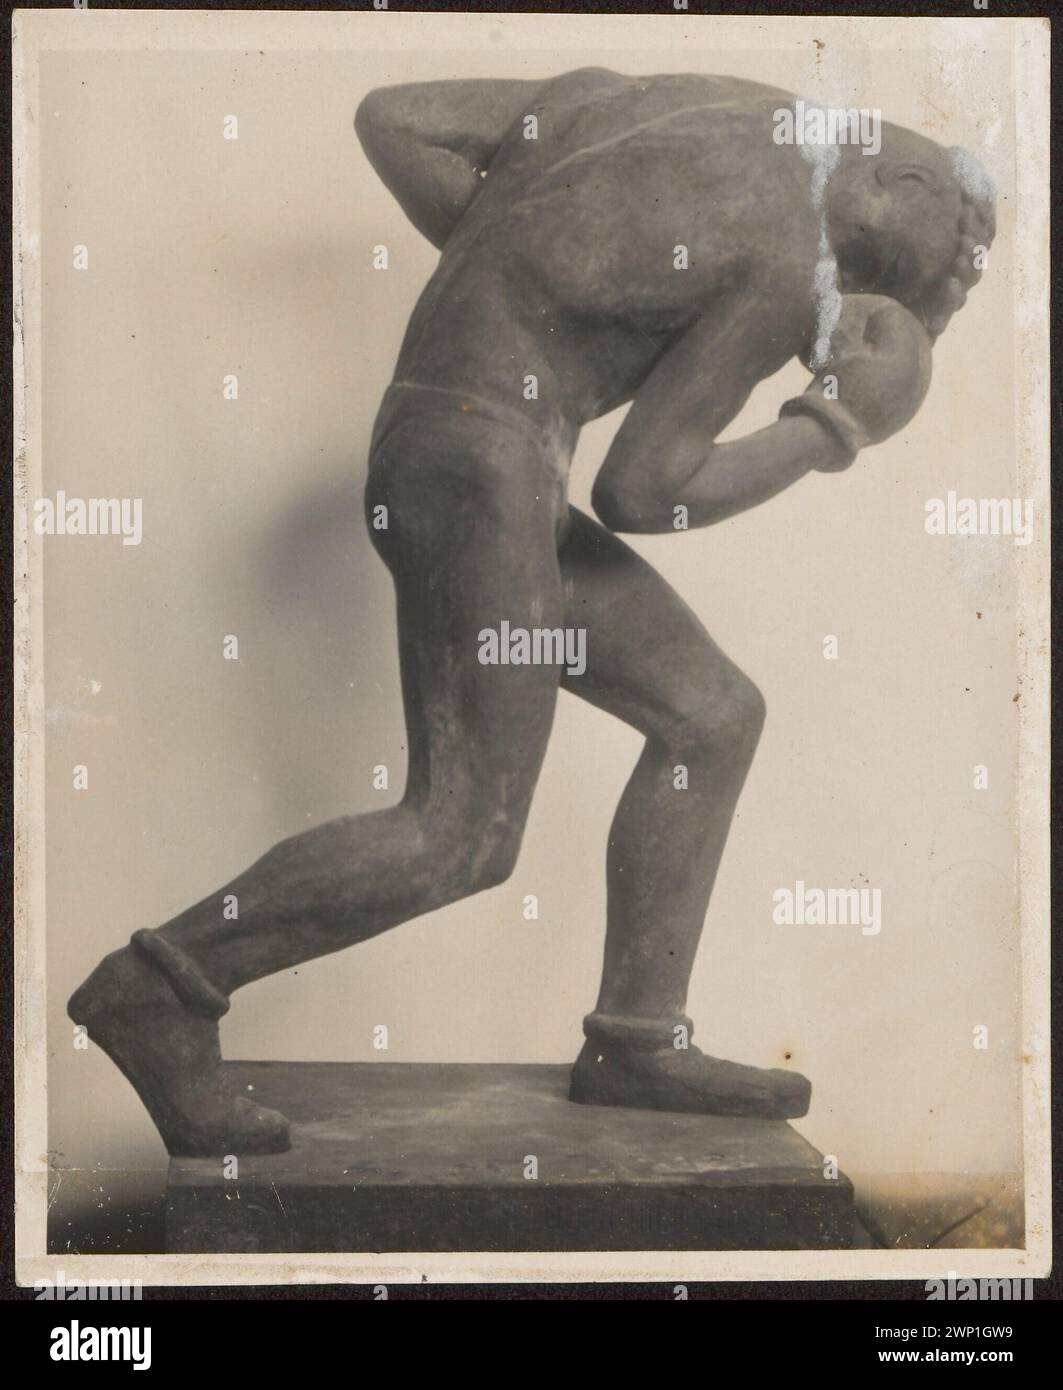 Boxer '-Bab Olga Niechska from 1932 (Cement).  yókien / paper / photographic paper / elatine bromo paper; height 15.4 cm, width 12.6 cm; di 92431/174 MNW; all rights reservations.Penalty, Alfons (1901-1989)-collection, Niewska, Olga (1898-1943), Niewska, Olga (1898-1943)-collection, Niewska, Olga (1898-1943)-reproduction, boxer, gift (provenance), sculpture (artist), Polish sculpture, sport in art Stock Photo